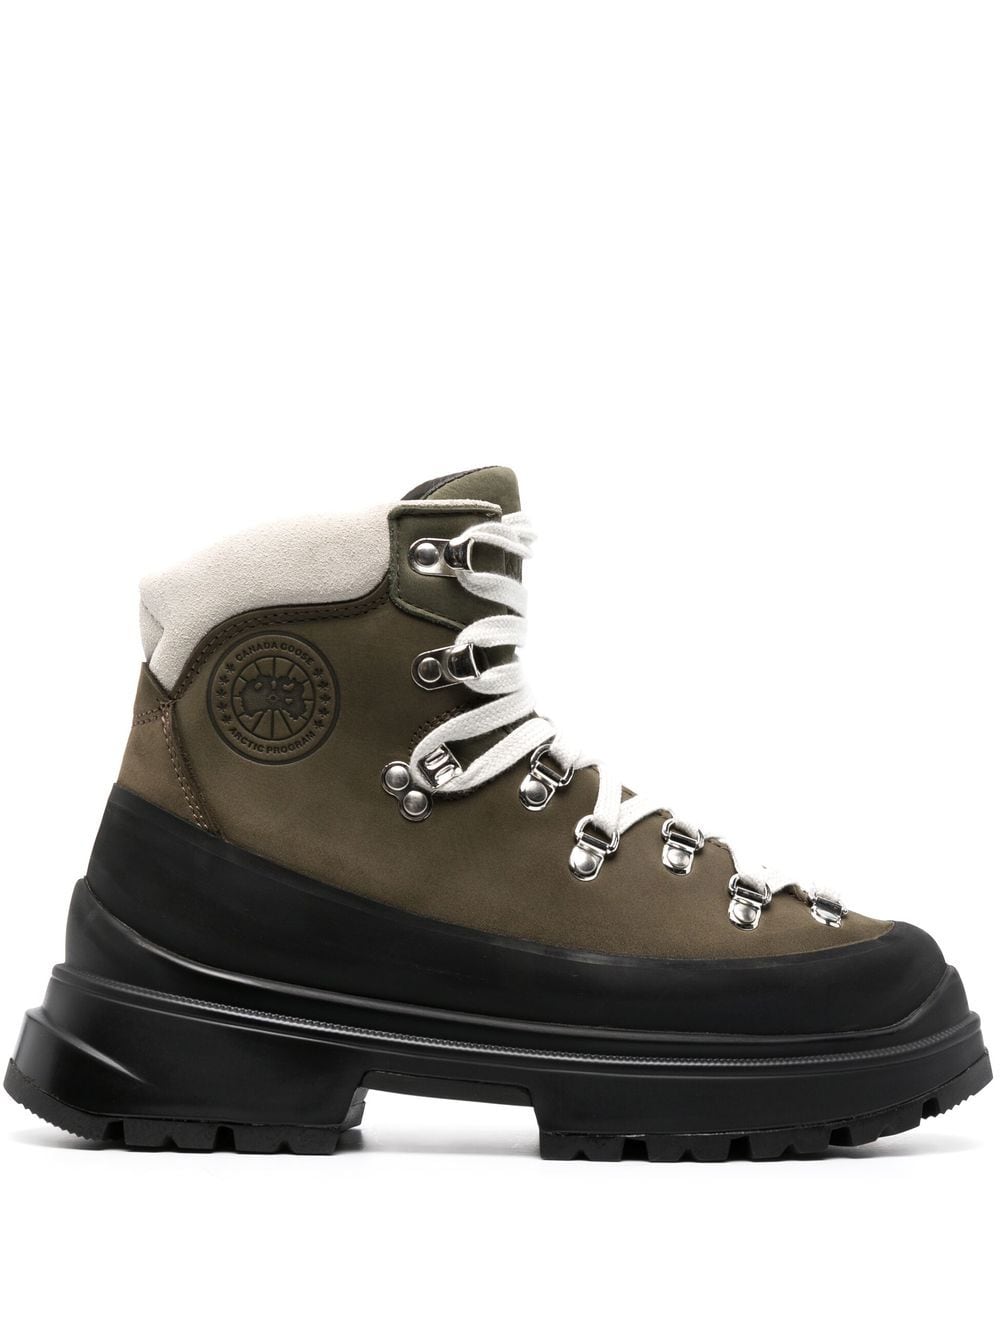 Canada Goose Journey lace-up hiking boots - Green von Canada Goose